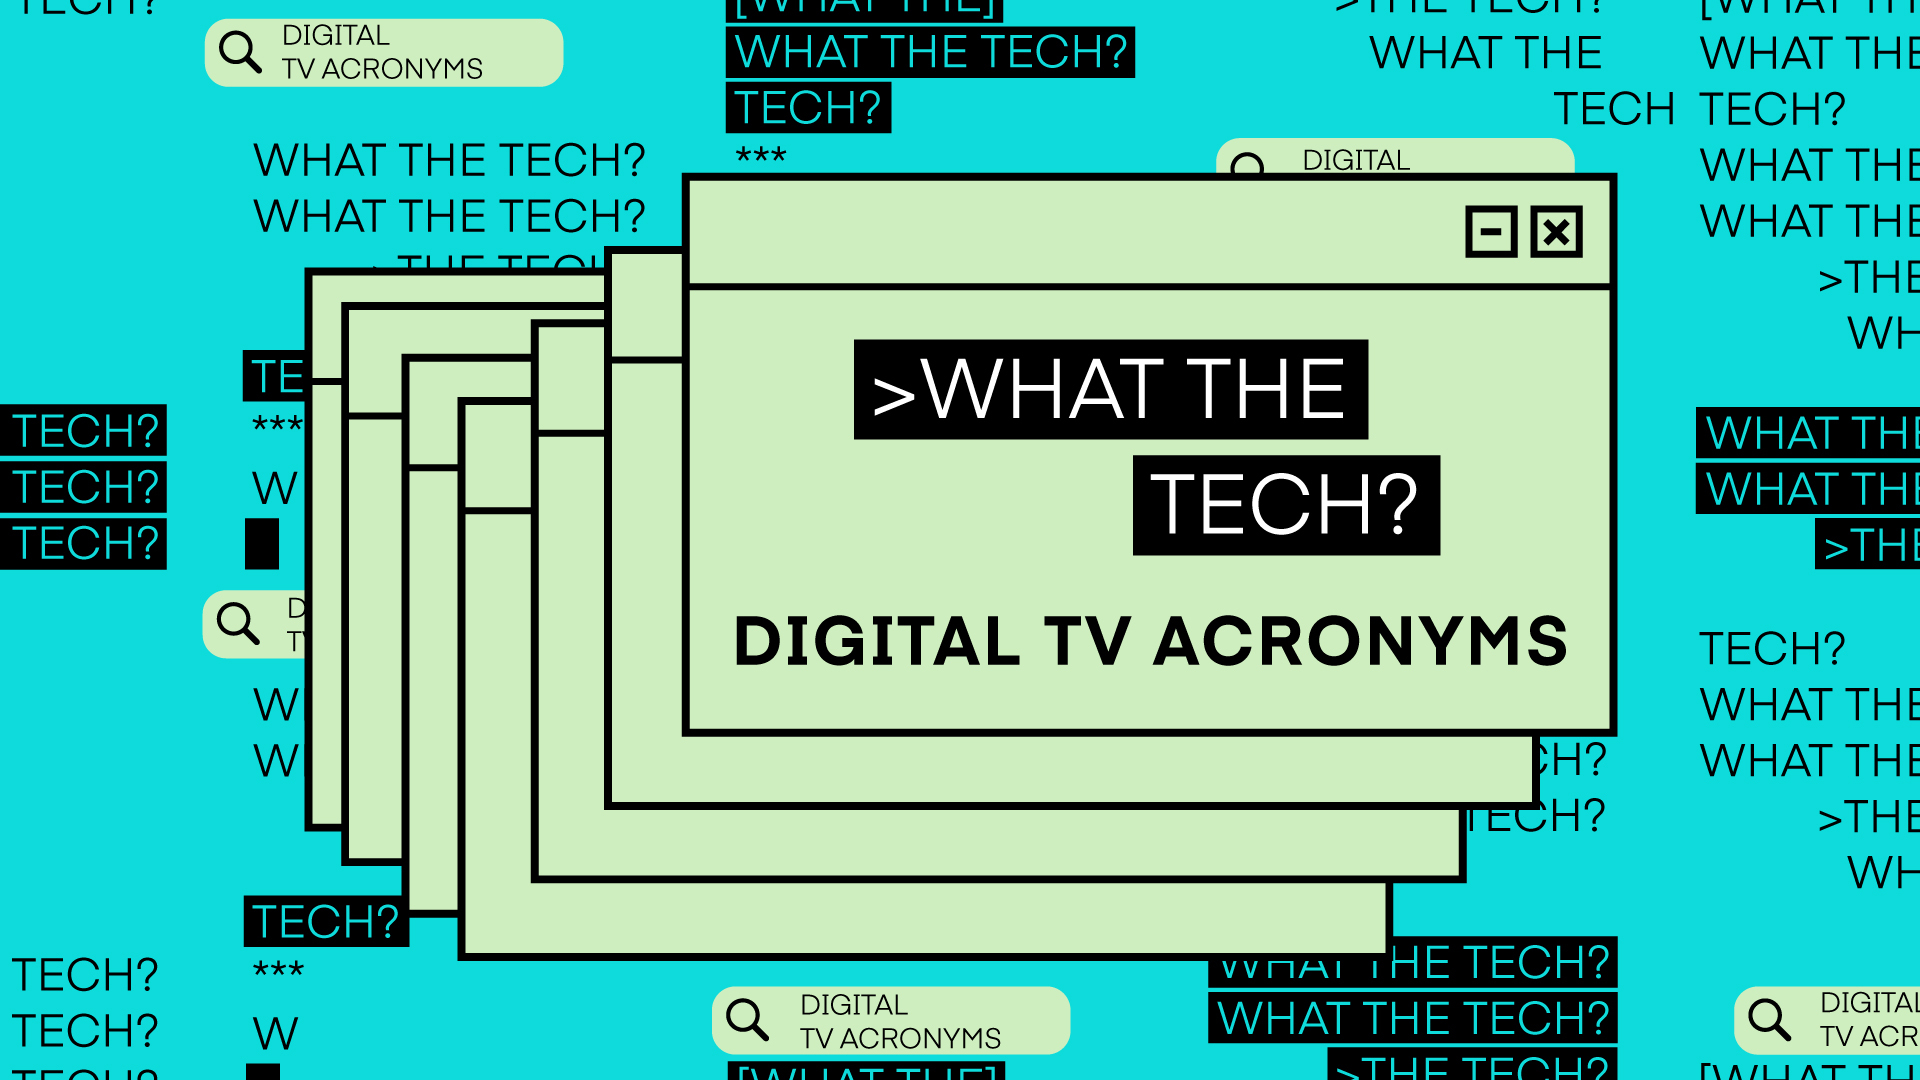 CTV, OTT, SVOD, AVOD, BVOD, FAST…What the Tech are all these digital TV acronyms? The Current